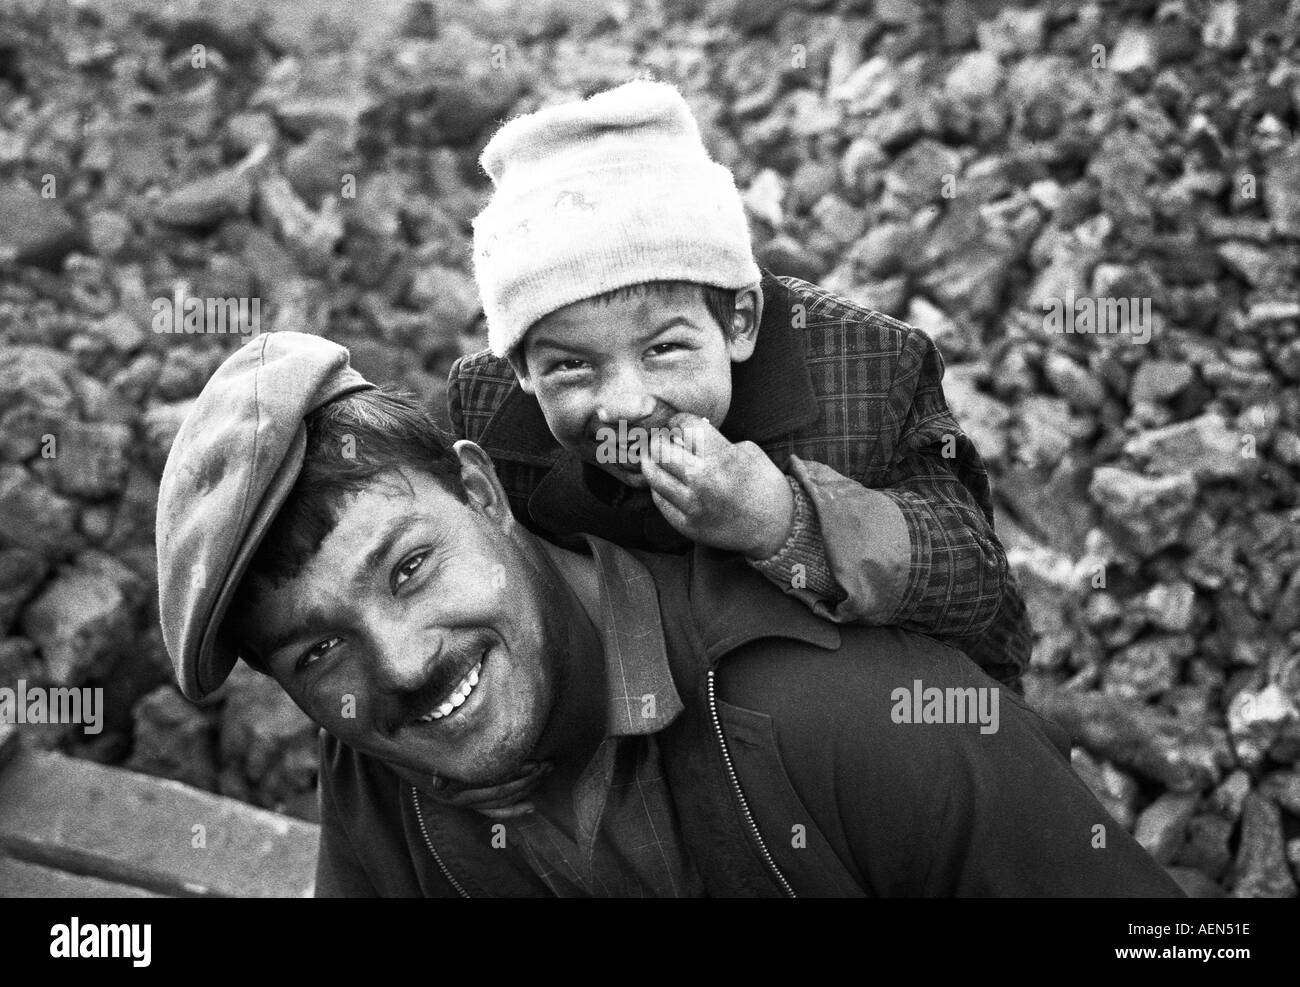 Father and Daughter from Kashgar having fun in front a pile of coal,  Xinjiang Province China Stock Photo